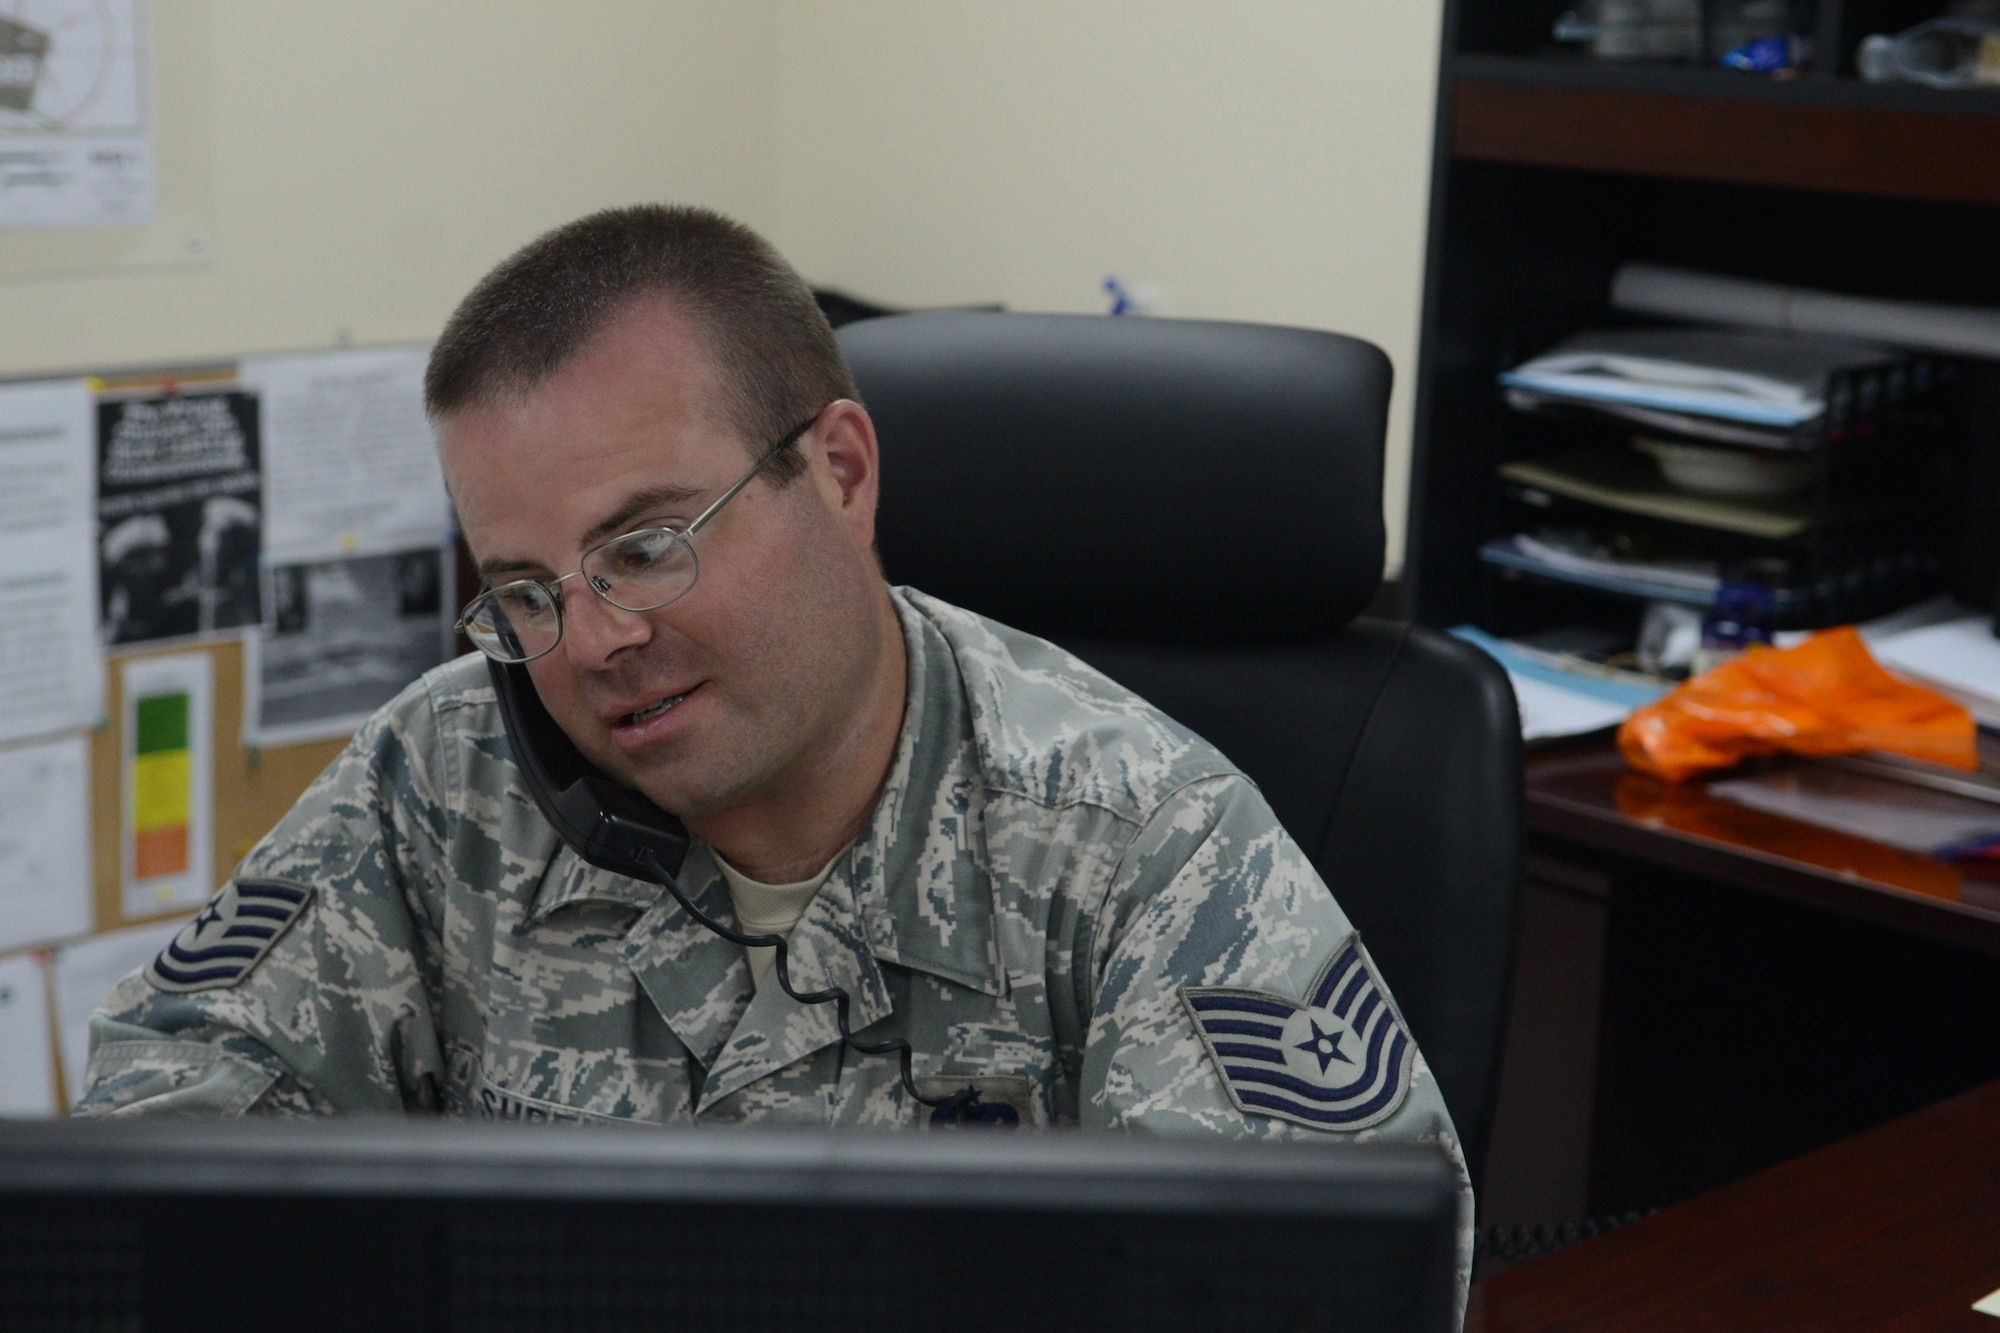 Tech. Sgt. James Shreve, 36th Maintenance Group section chief of programs and resources, works on the integrated maintenance database system while speaking to a customer Nov. 12, 2013, on Andersen Air Force Base, Guam. The inactivation of the flight is part of an Air Force-wide initiative to better align maintenance objectives for the future fiscal years. (U.S. Air Force photo by Airman 1st Class Emily A. Bradley/Released)